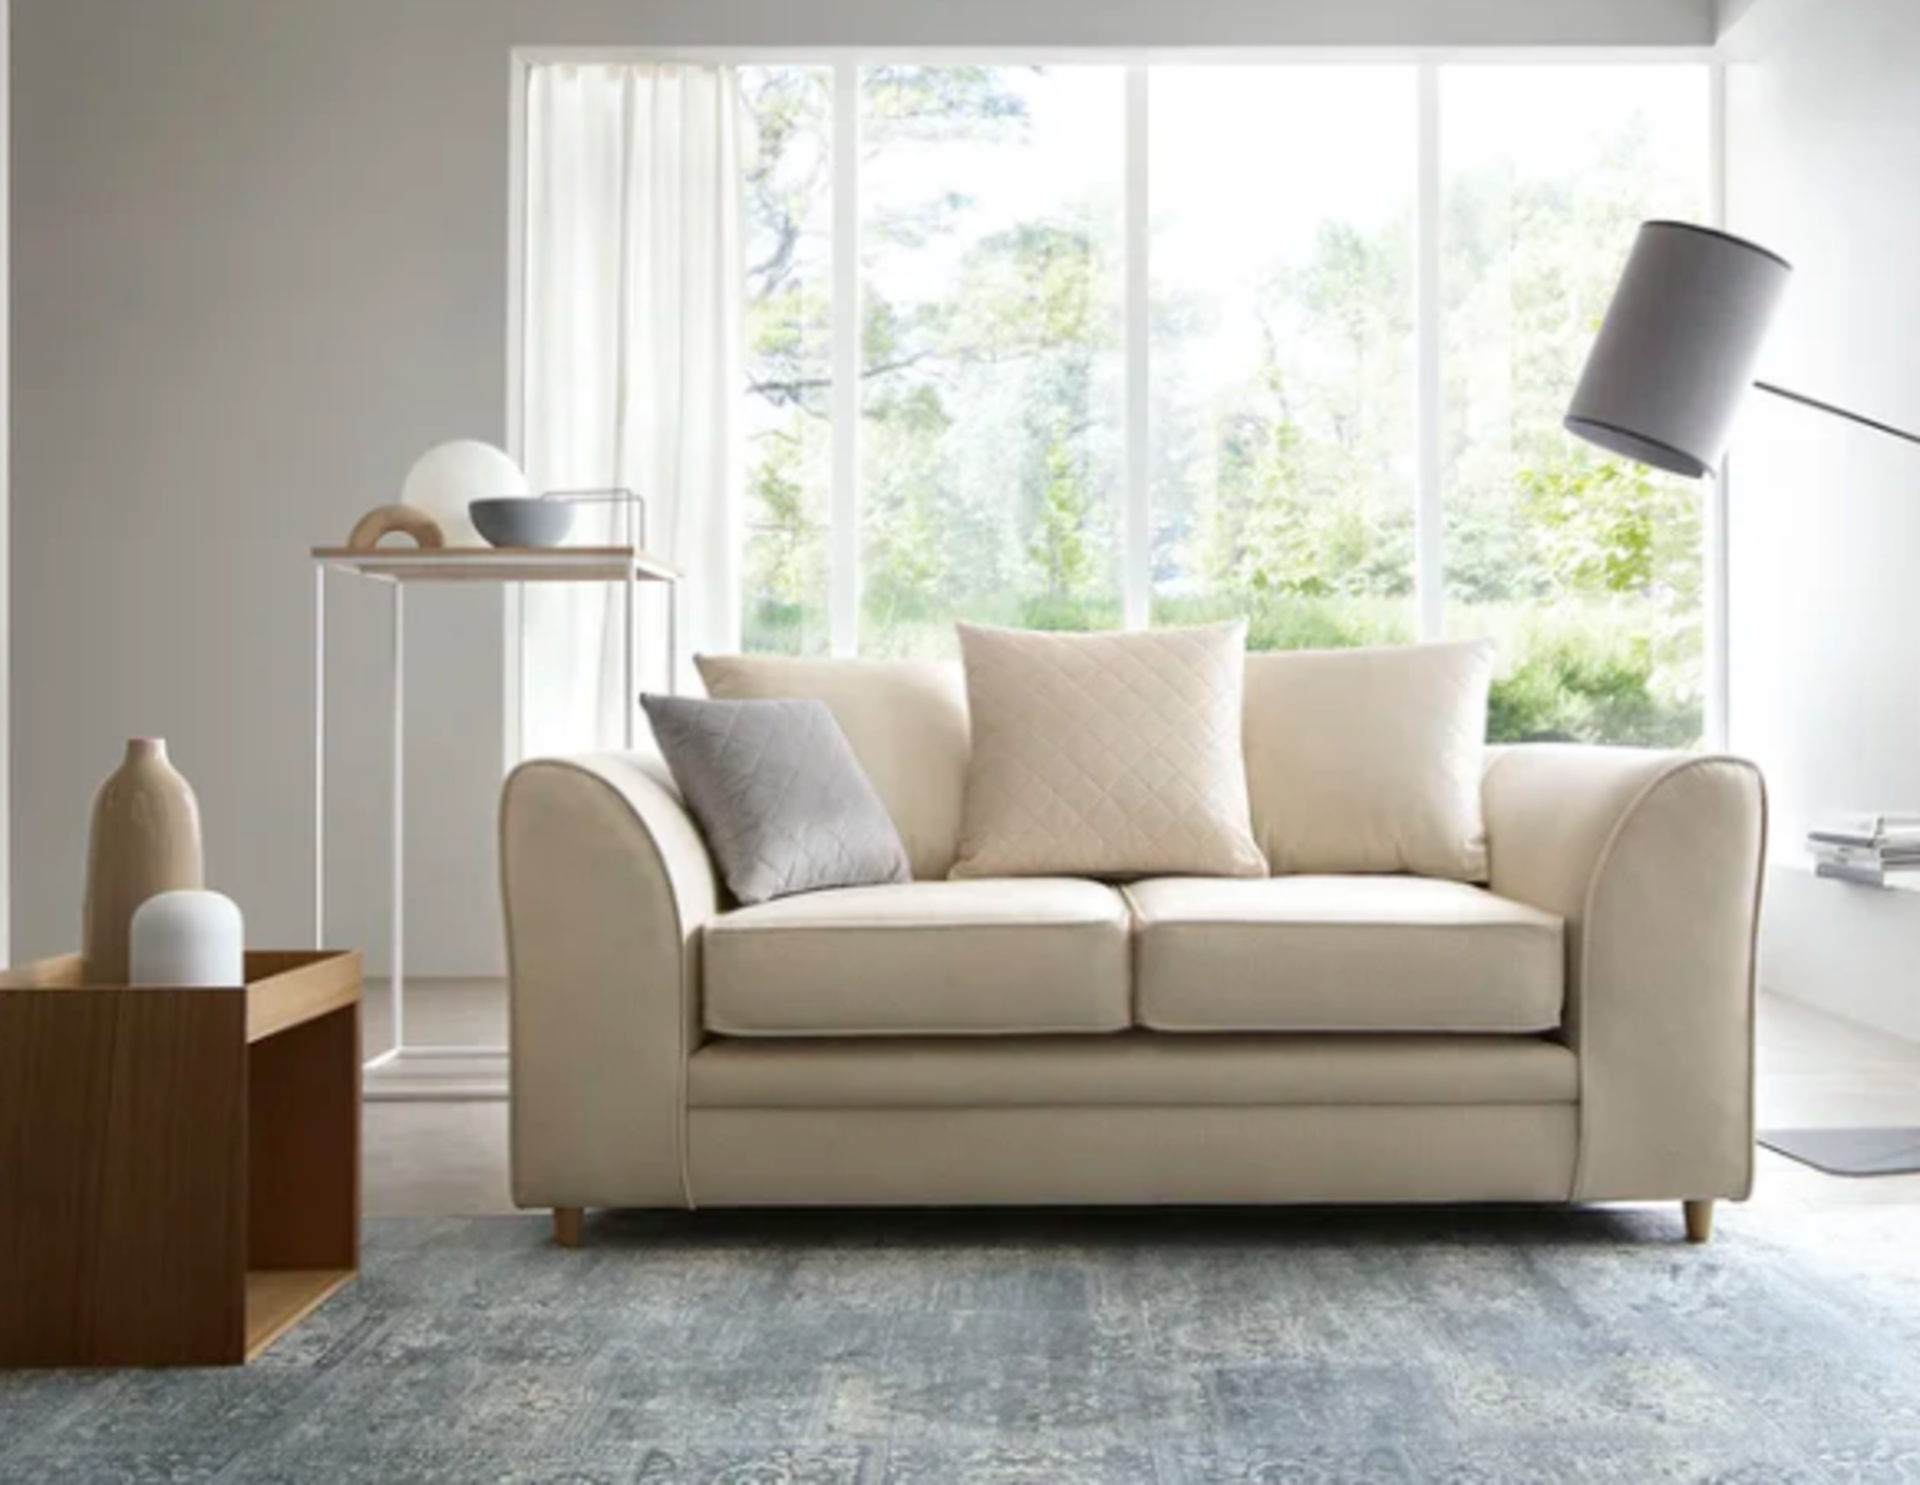 Abakus Direct Chicago 2 Seater Upholstered Sofa. RRP £799.99. Cream. Relax in this luxury Chicago